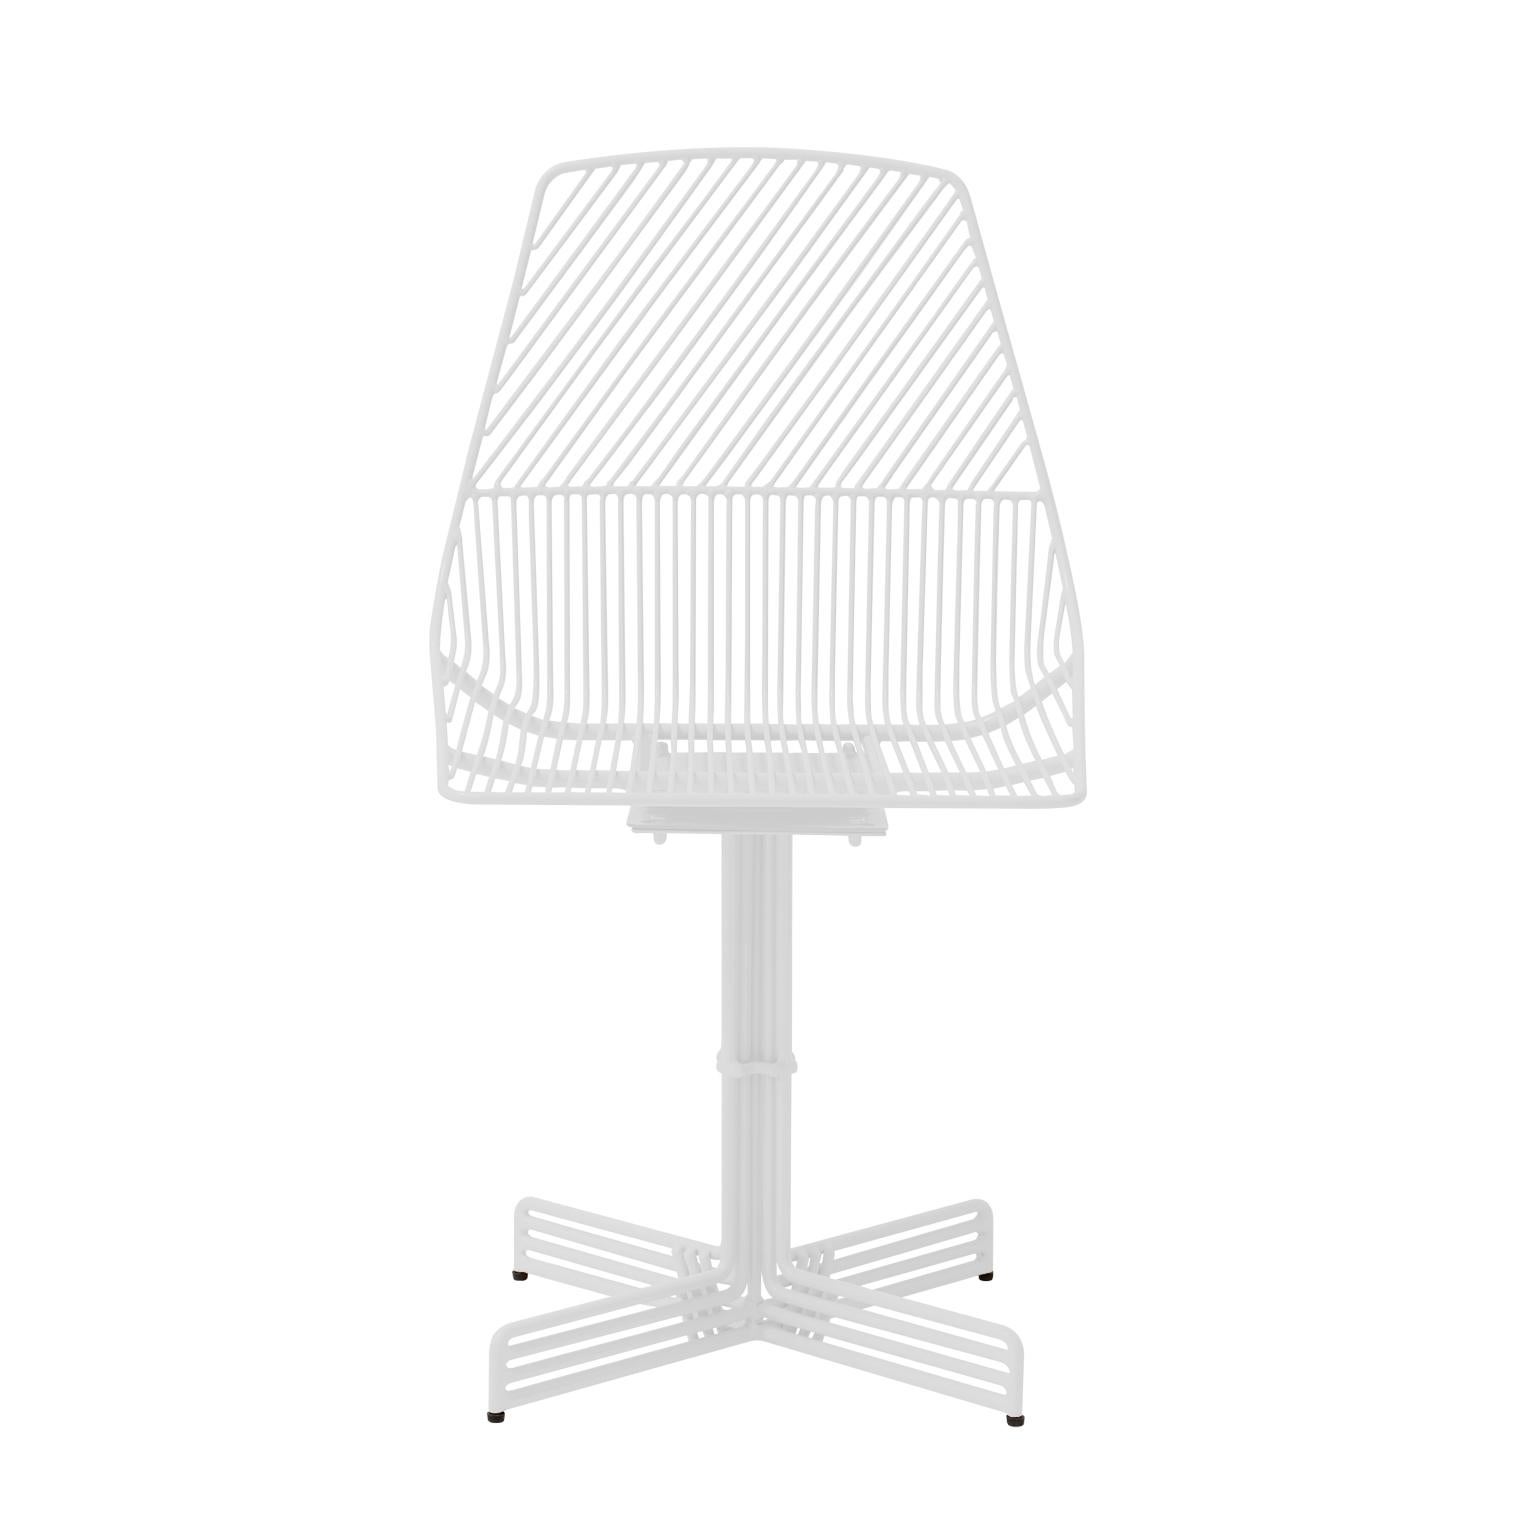 A twist on our Ethel chair, this rotating modern wire chair features a refined, clean, crisp pattern that makes it the perfect addition to any indoor or outdoor dining set.